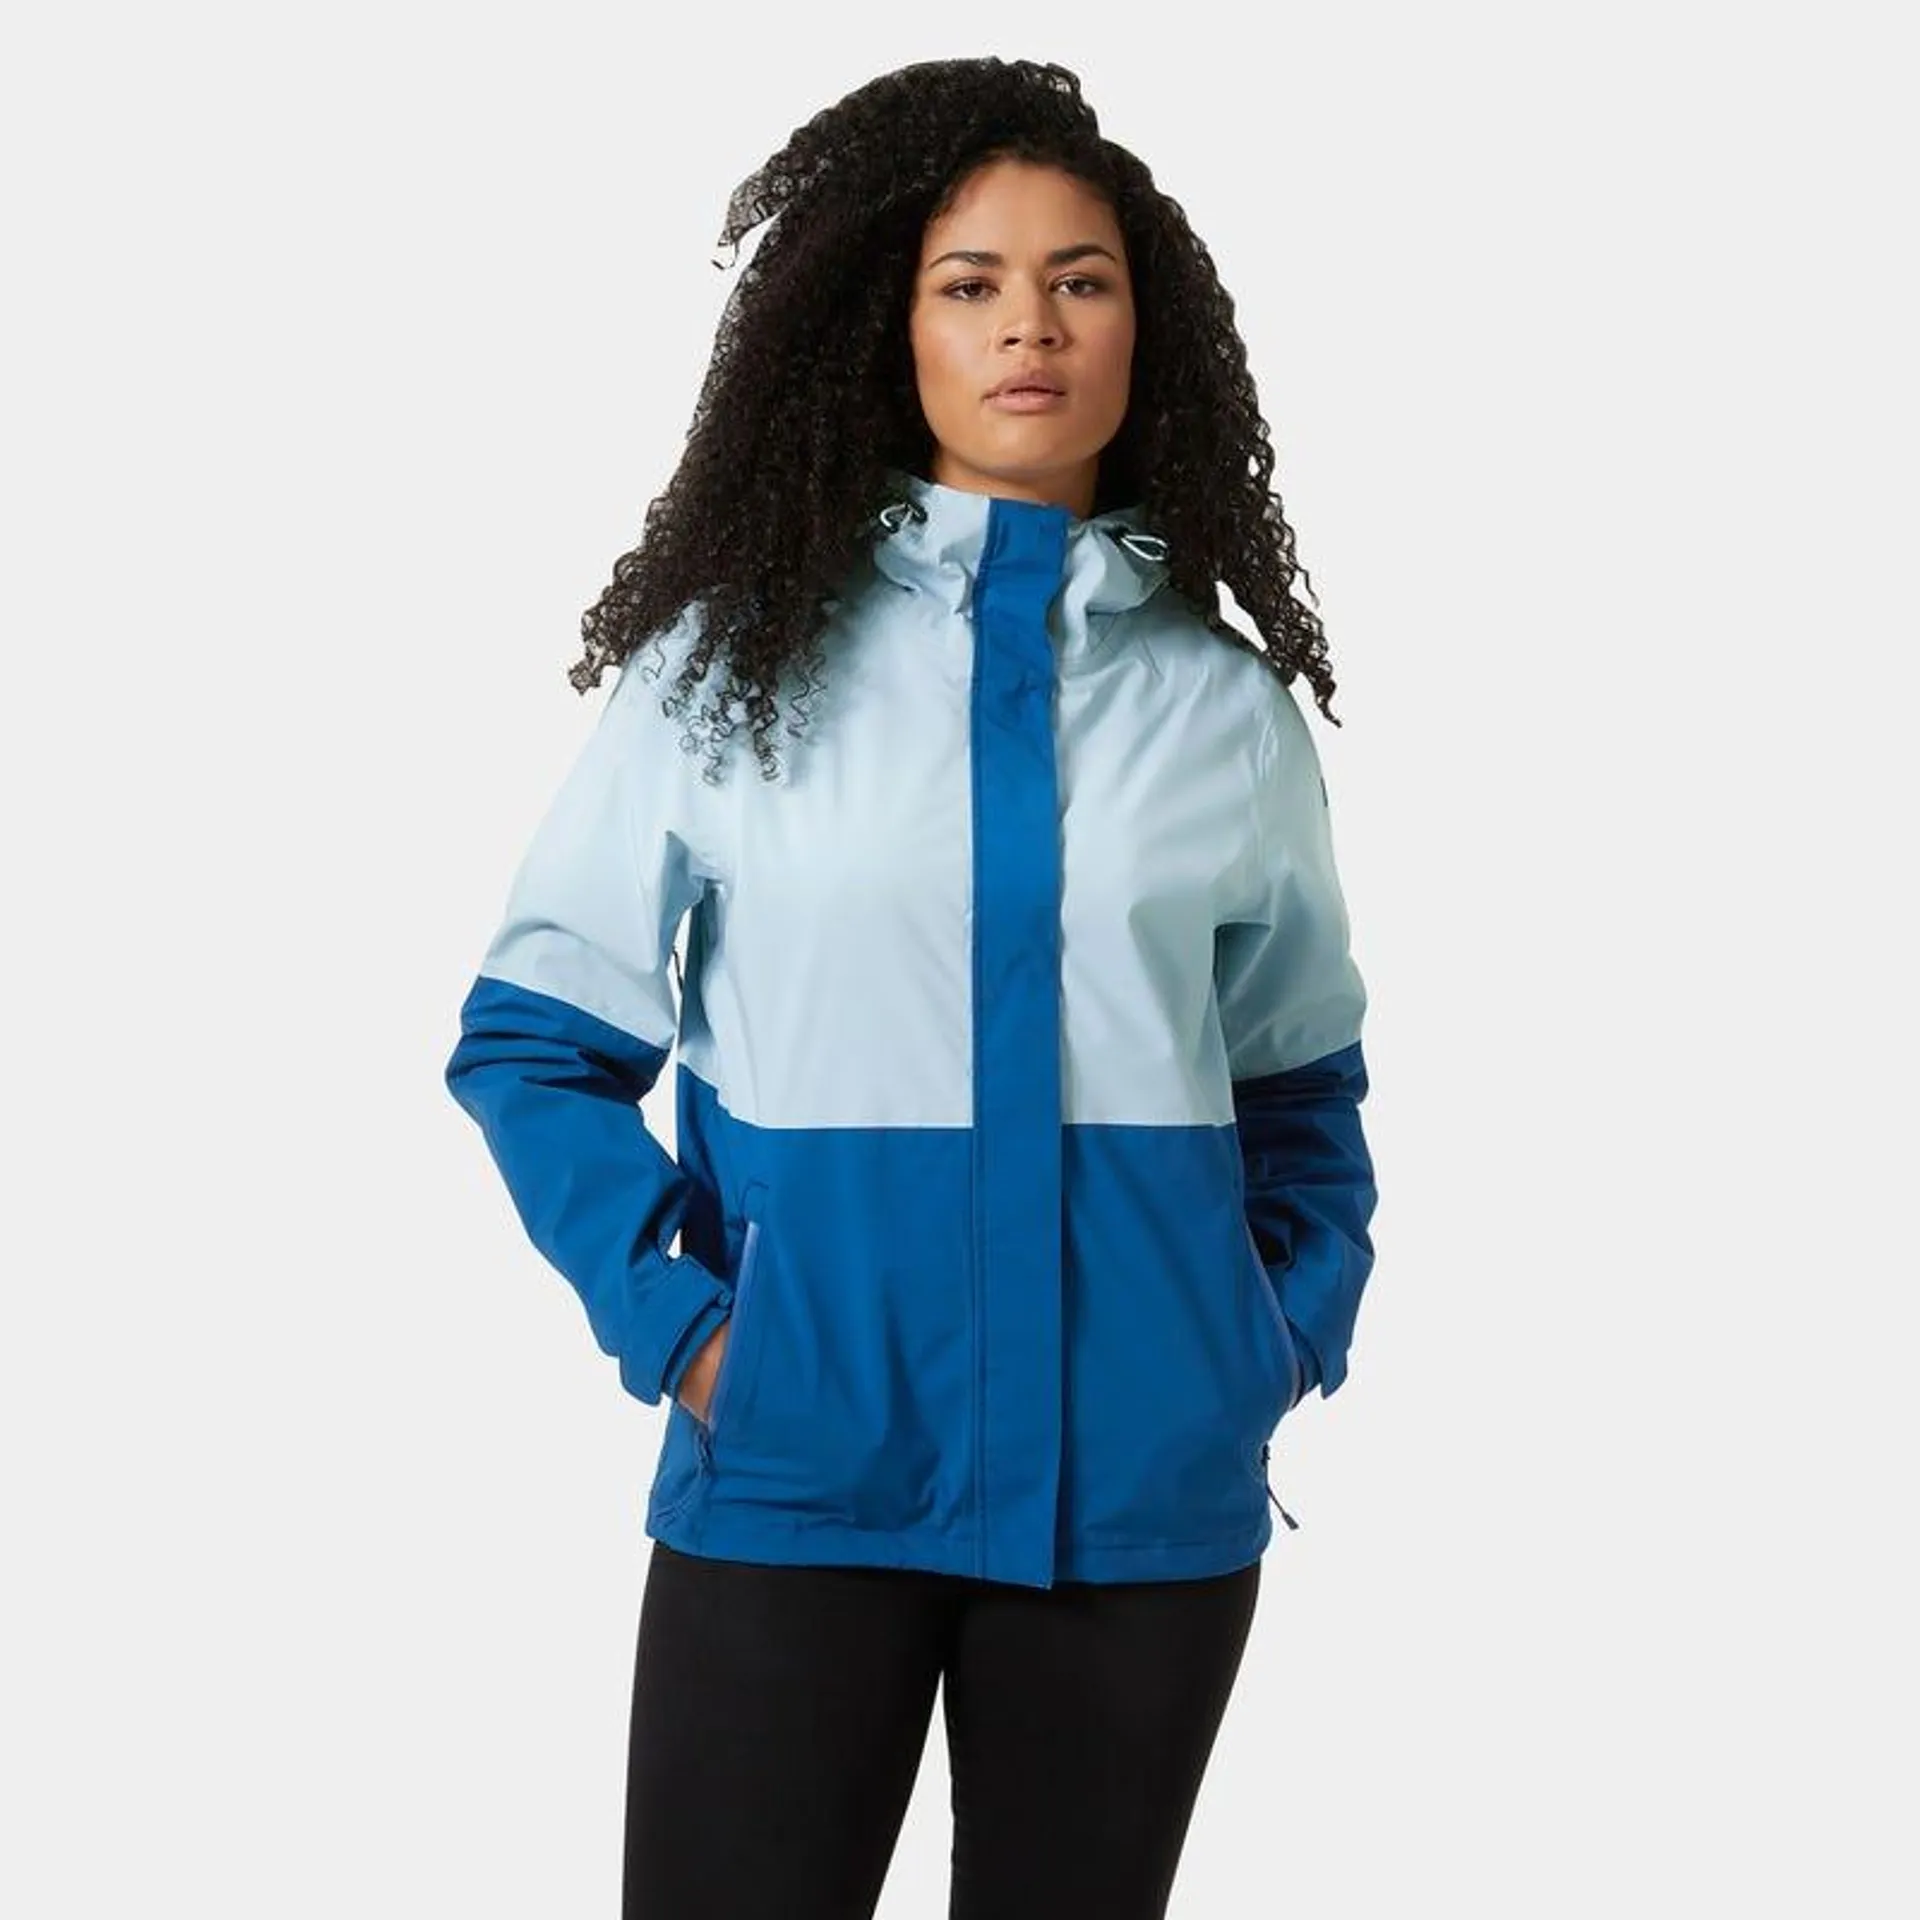 Chaqueta impermeable Juell Storm para mujer